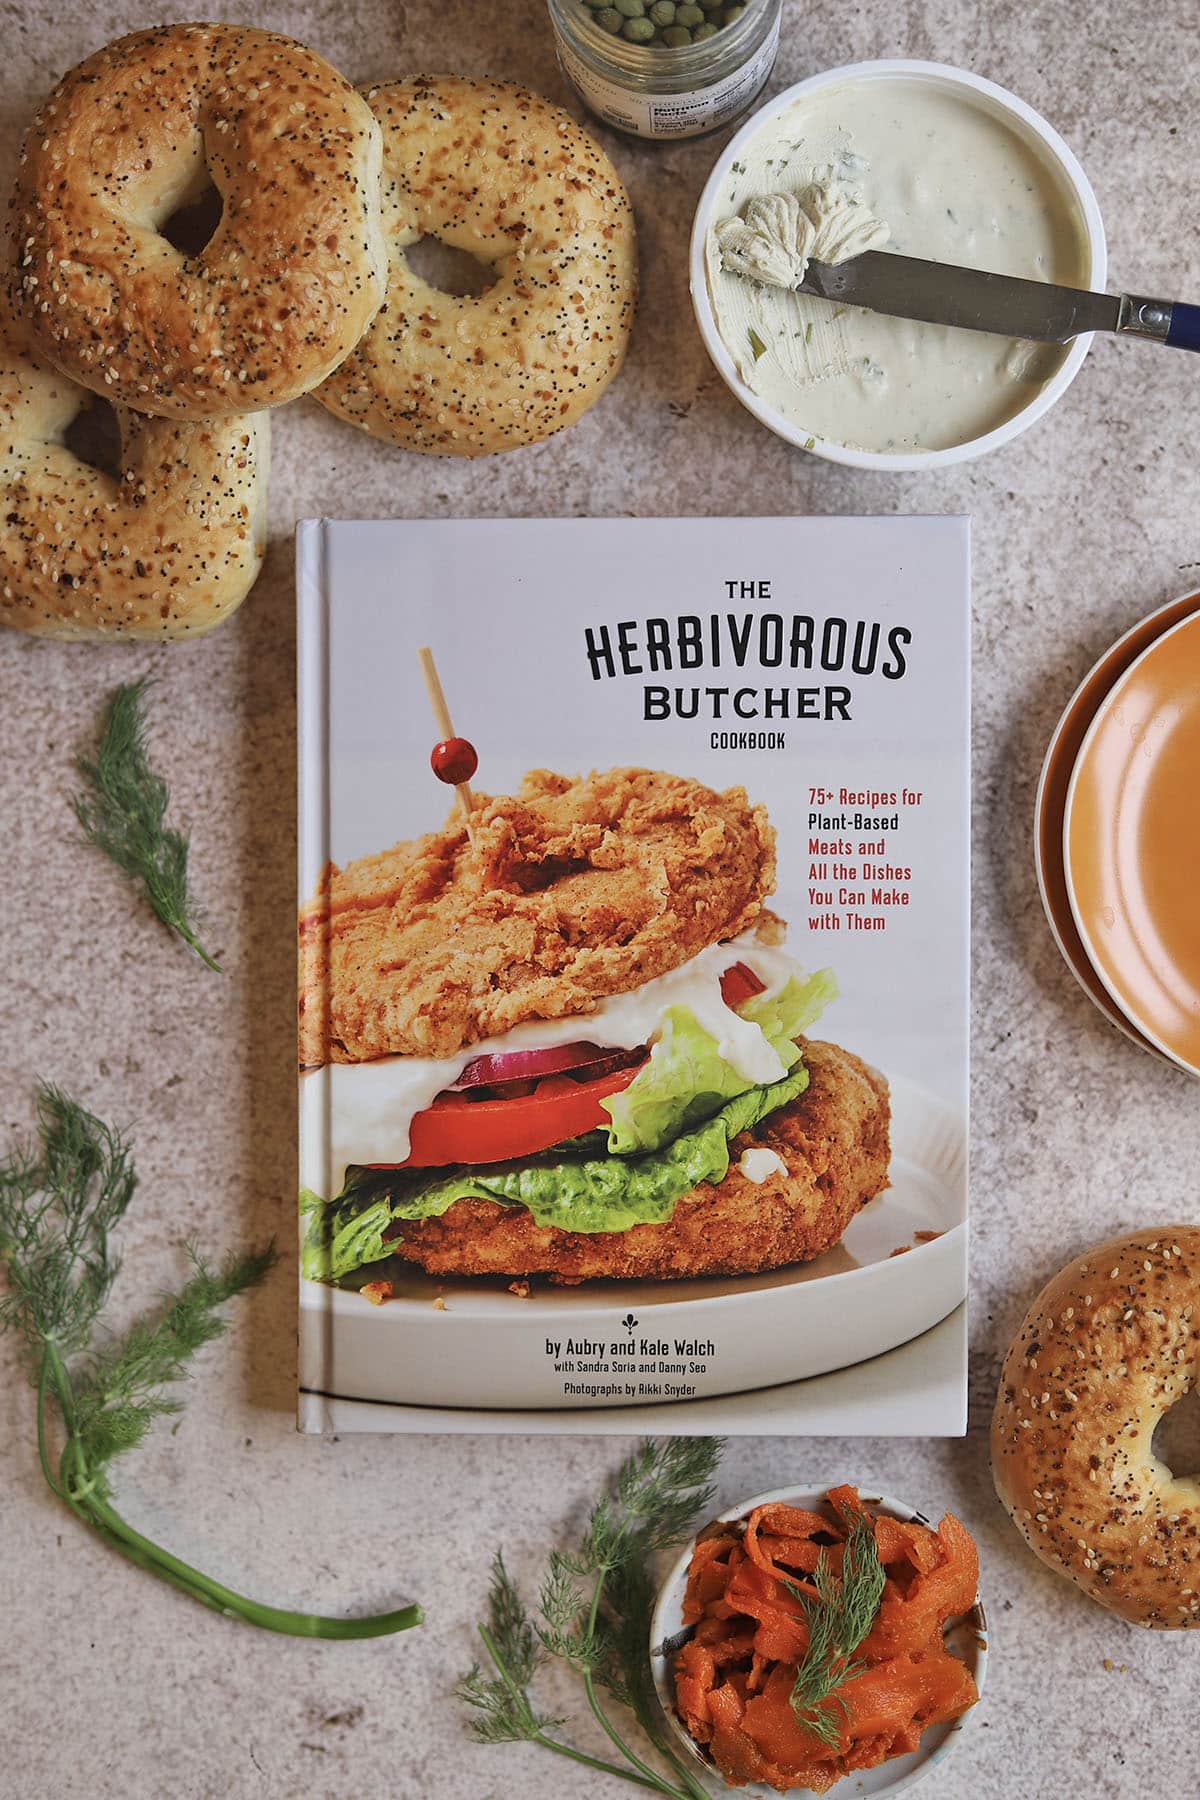 Herbivorous Butcher cookbook with bagels, vegan cream cheese, and carrot lox.